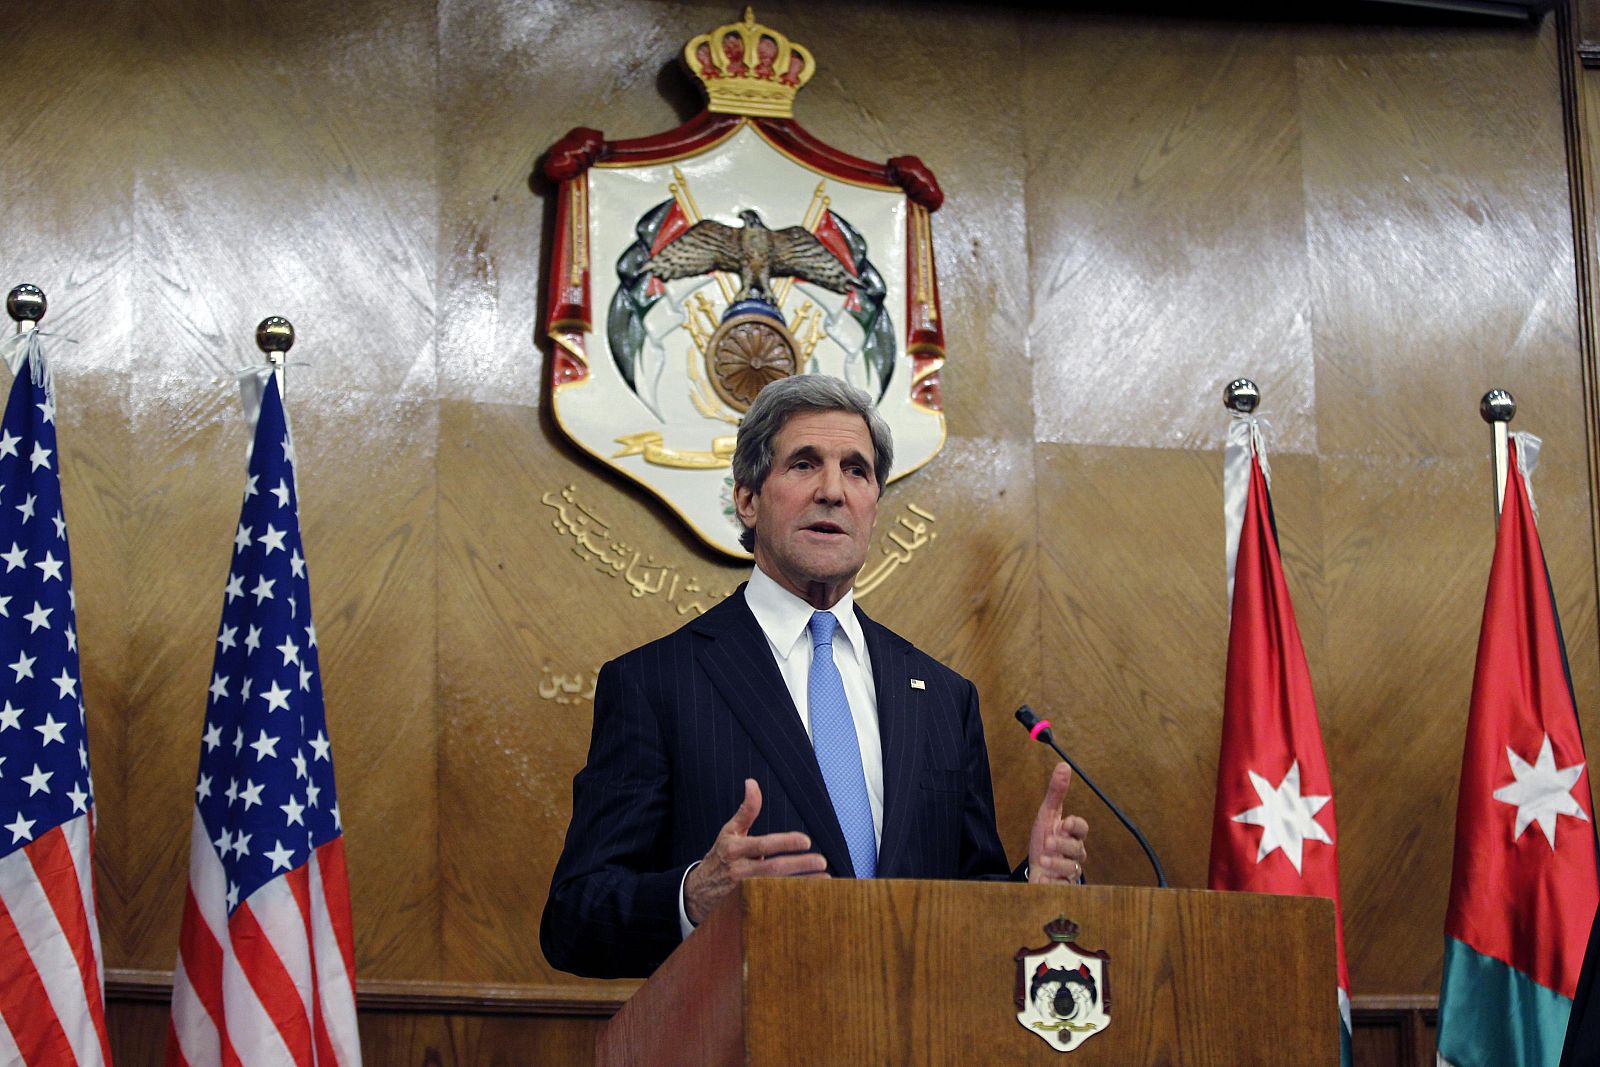 U.S. Secretary of State Kerry speaks during a joint news conference with Jordanian Foreign Minister Judeh in Amman